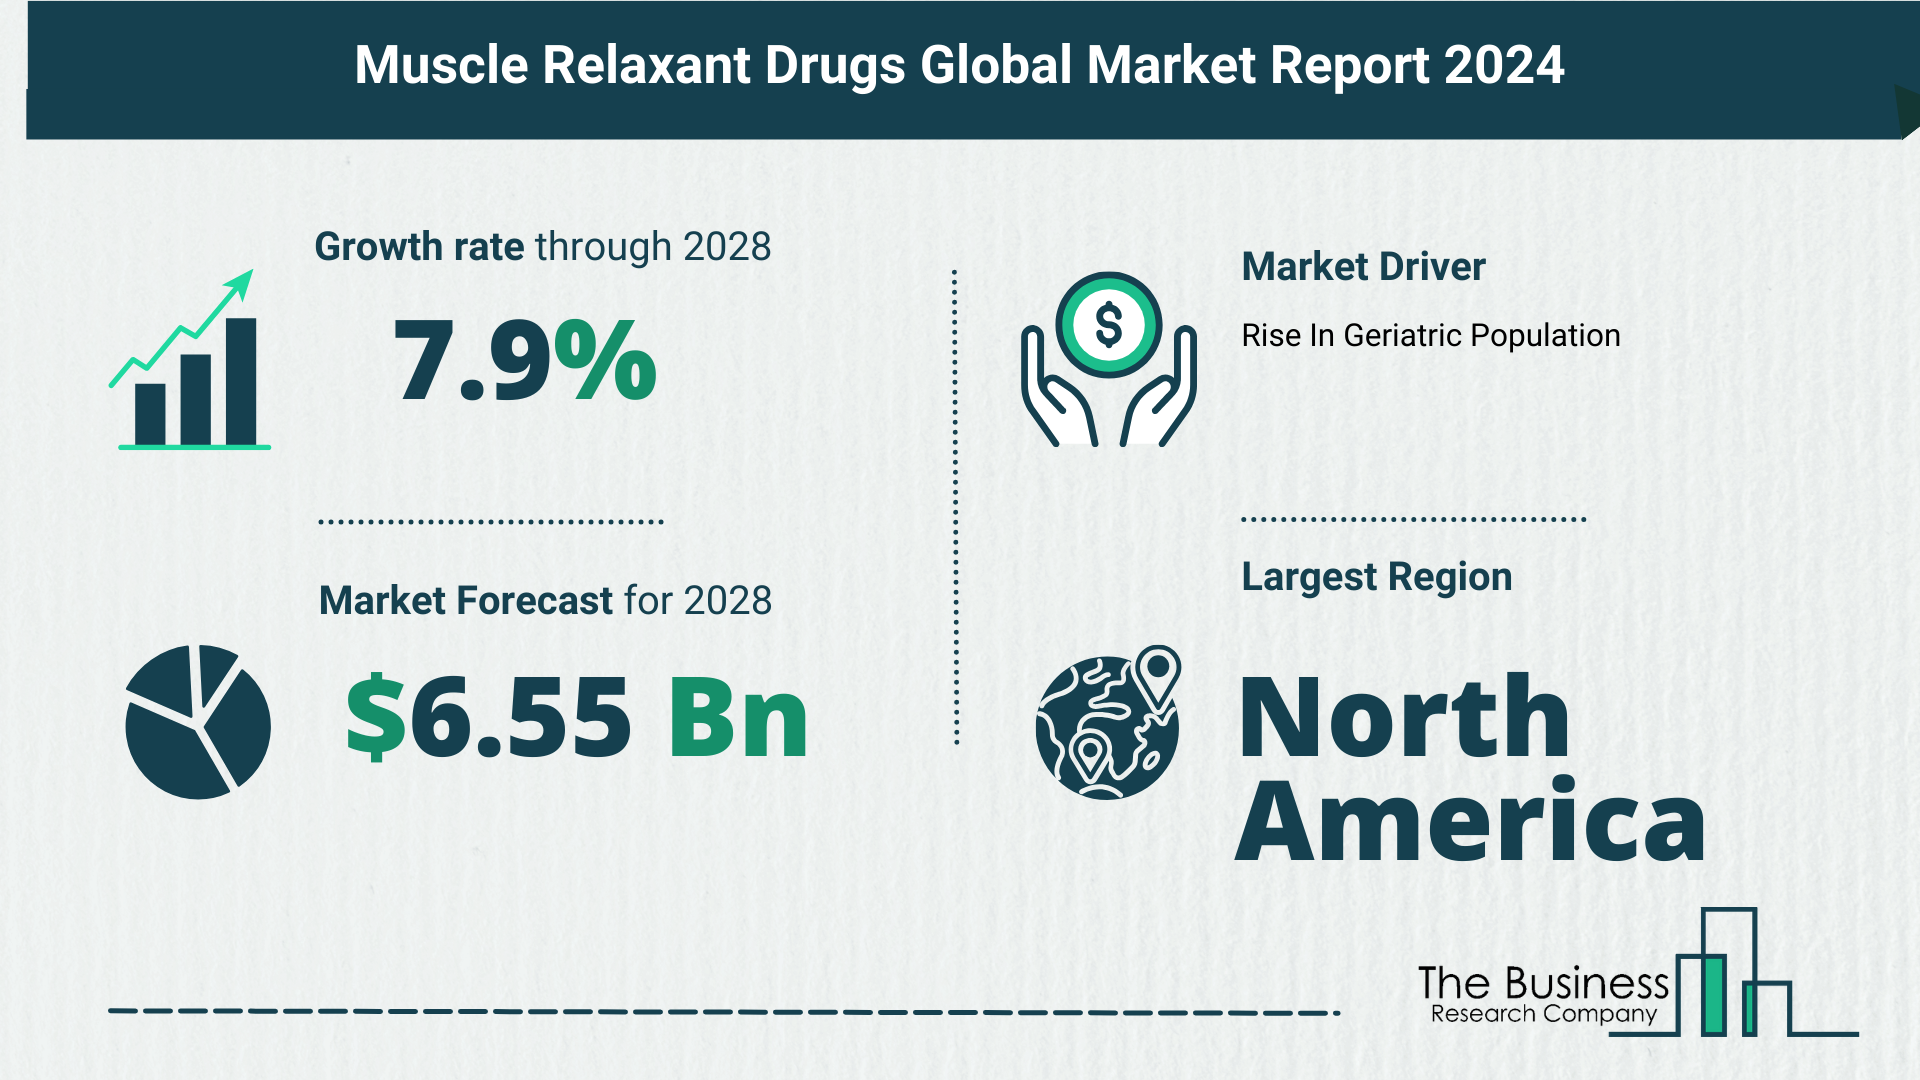 Global Muscle Relaxant Drugs Market Analysis: Estimated Market Size And Growth Rate